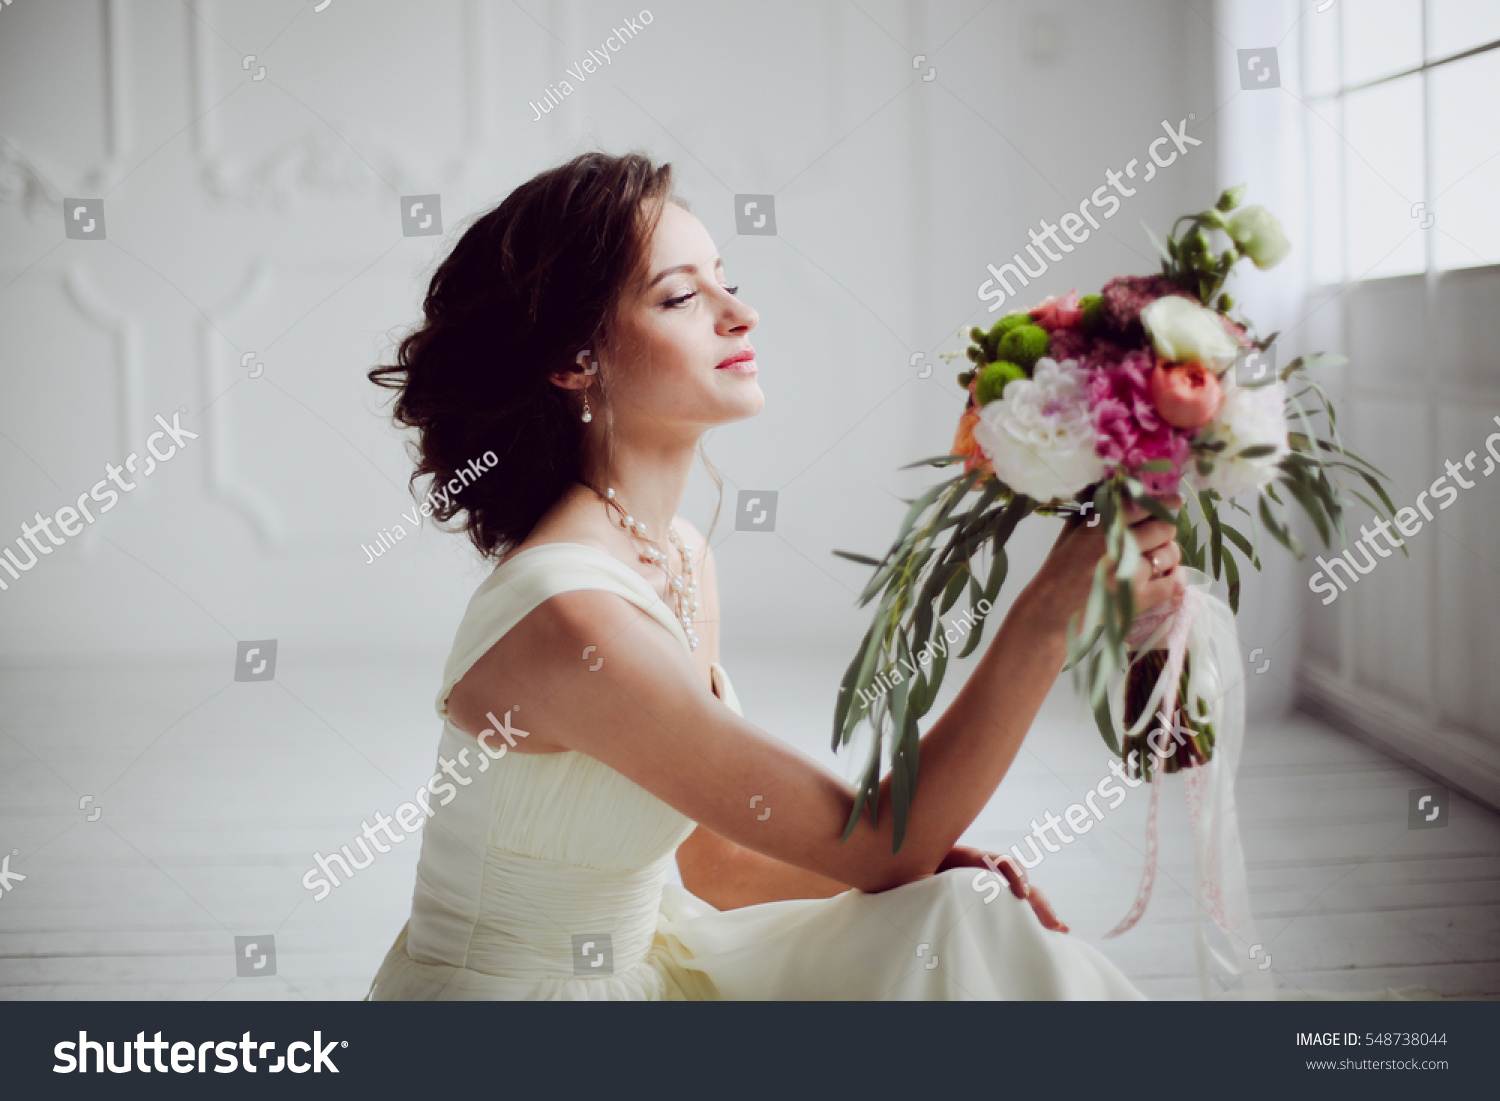 Elegant charming young brunette bride is sitting on white rustic wooden floor in a wedding dress with a big bouquet of flowers, daydreaming,  in the interior Waiting for groom. #548738044